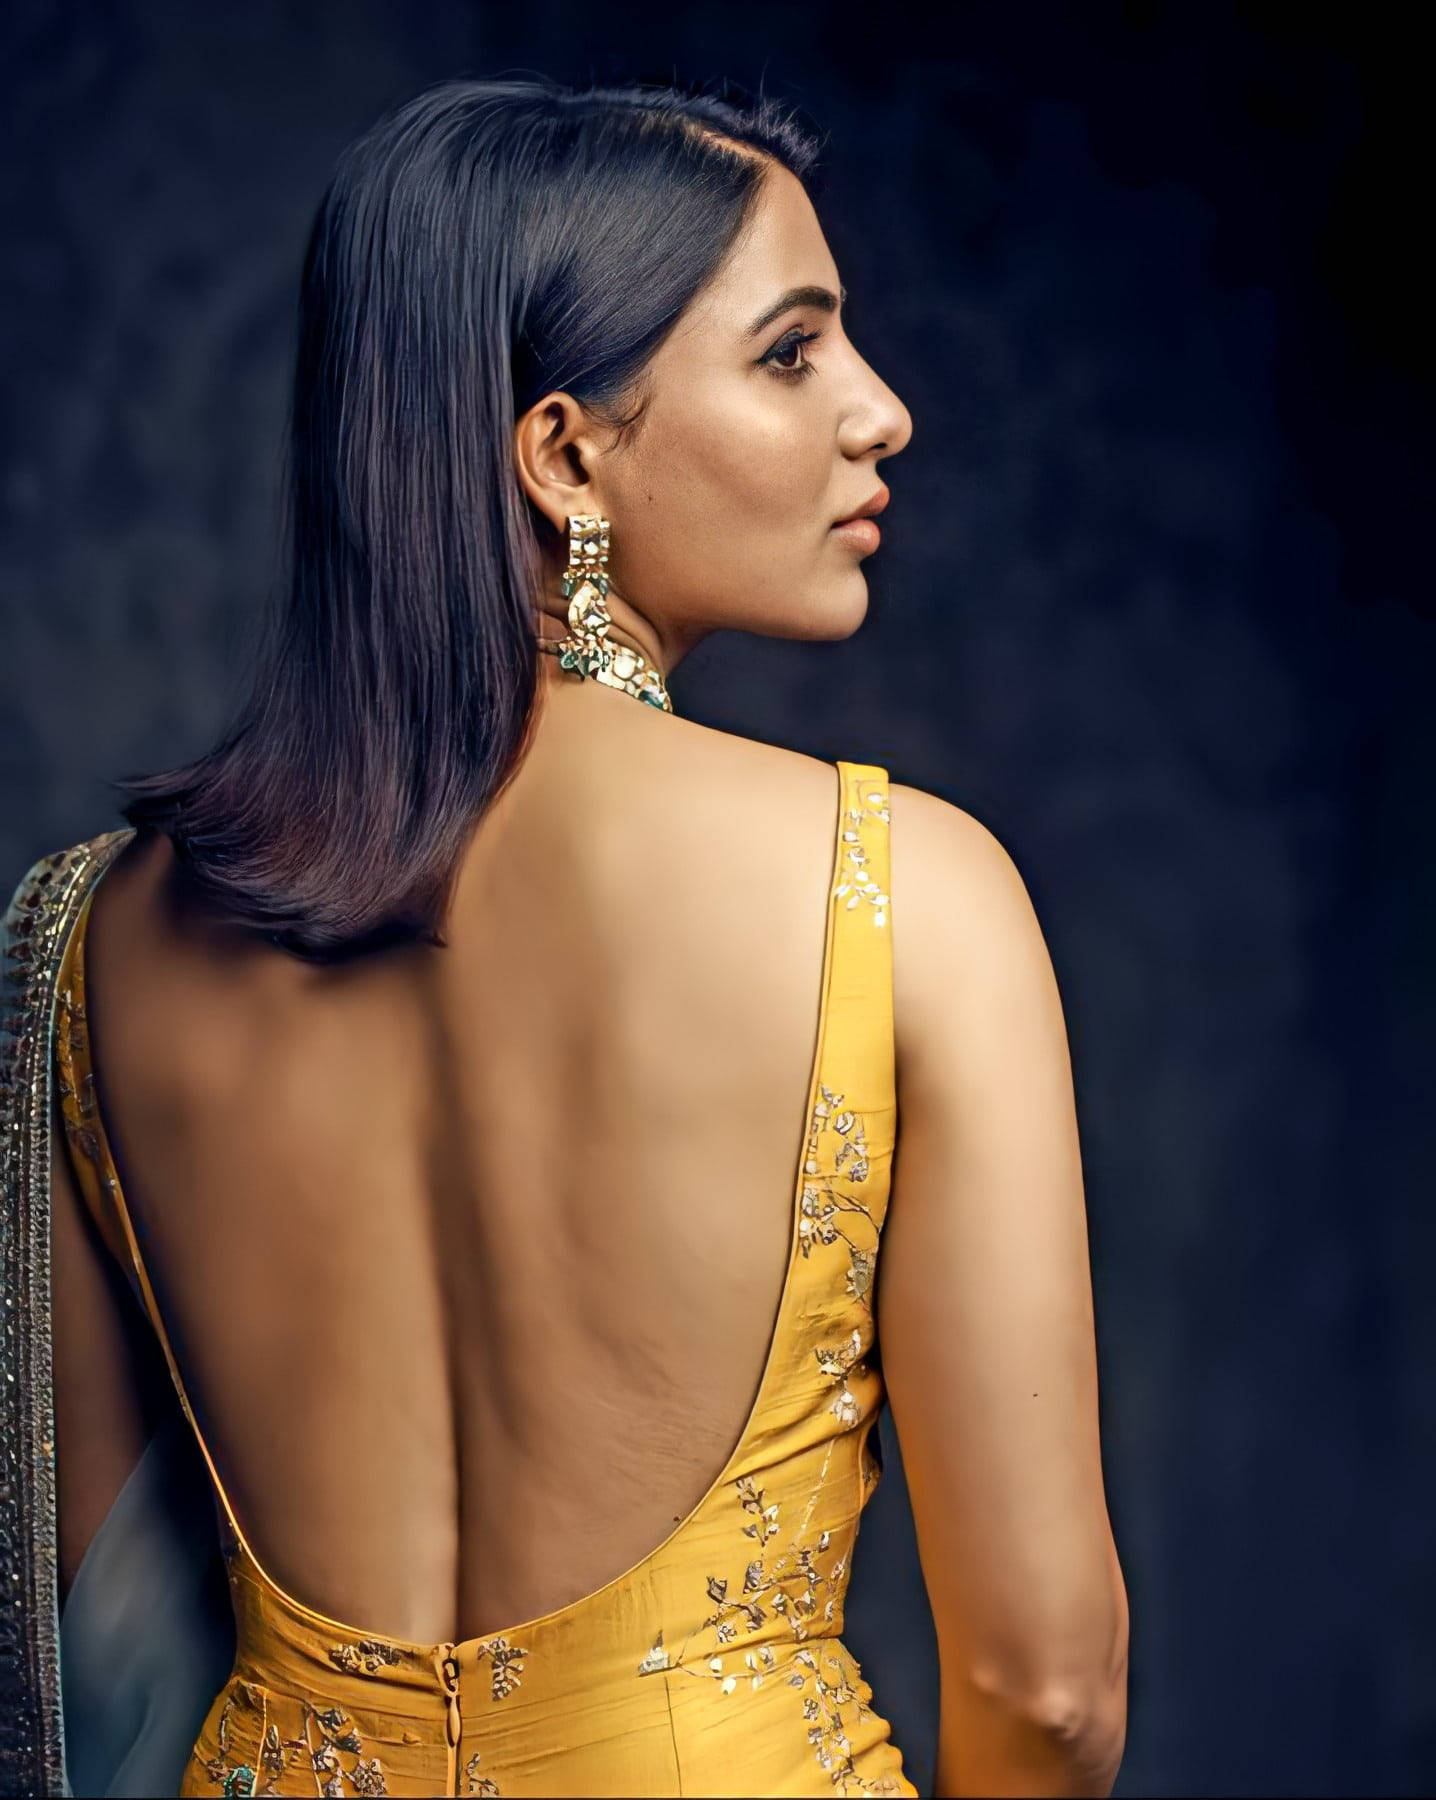 Stunning High Definition Image Of Samantha In A Backless Yellow Outfit Wallpaper